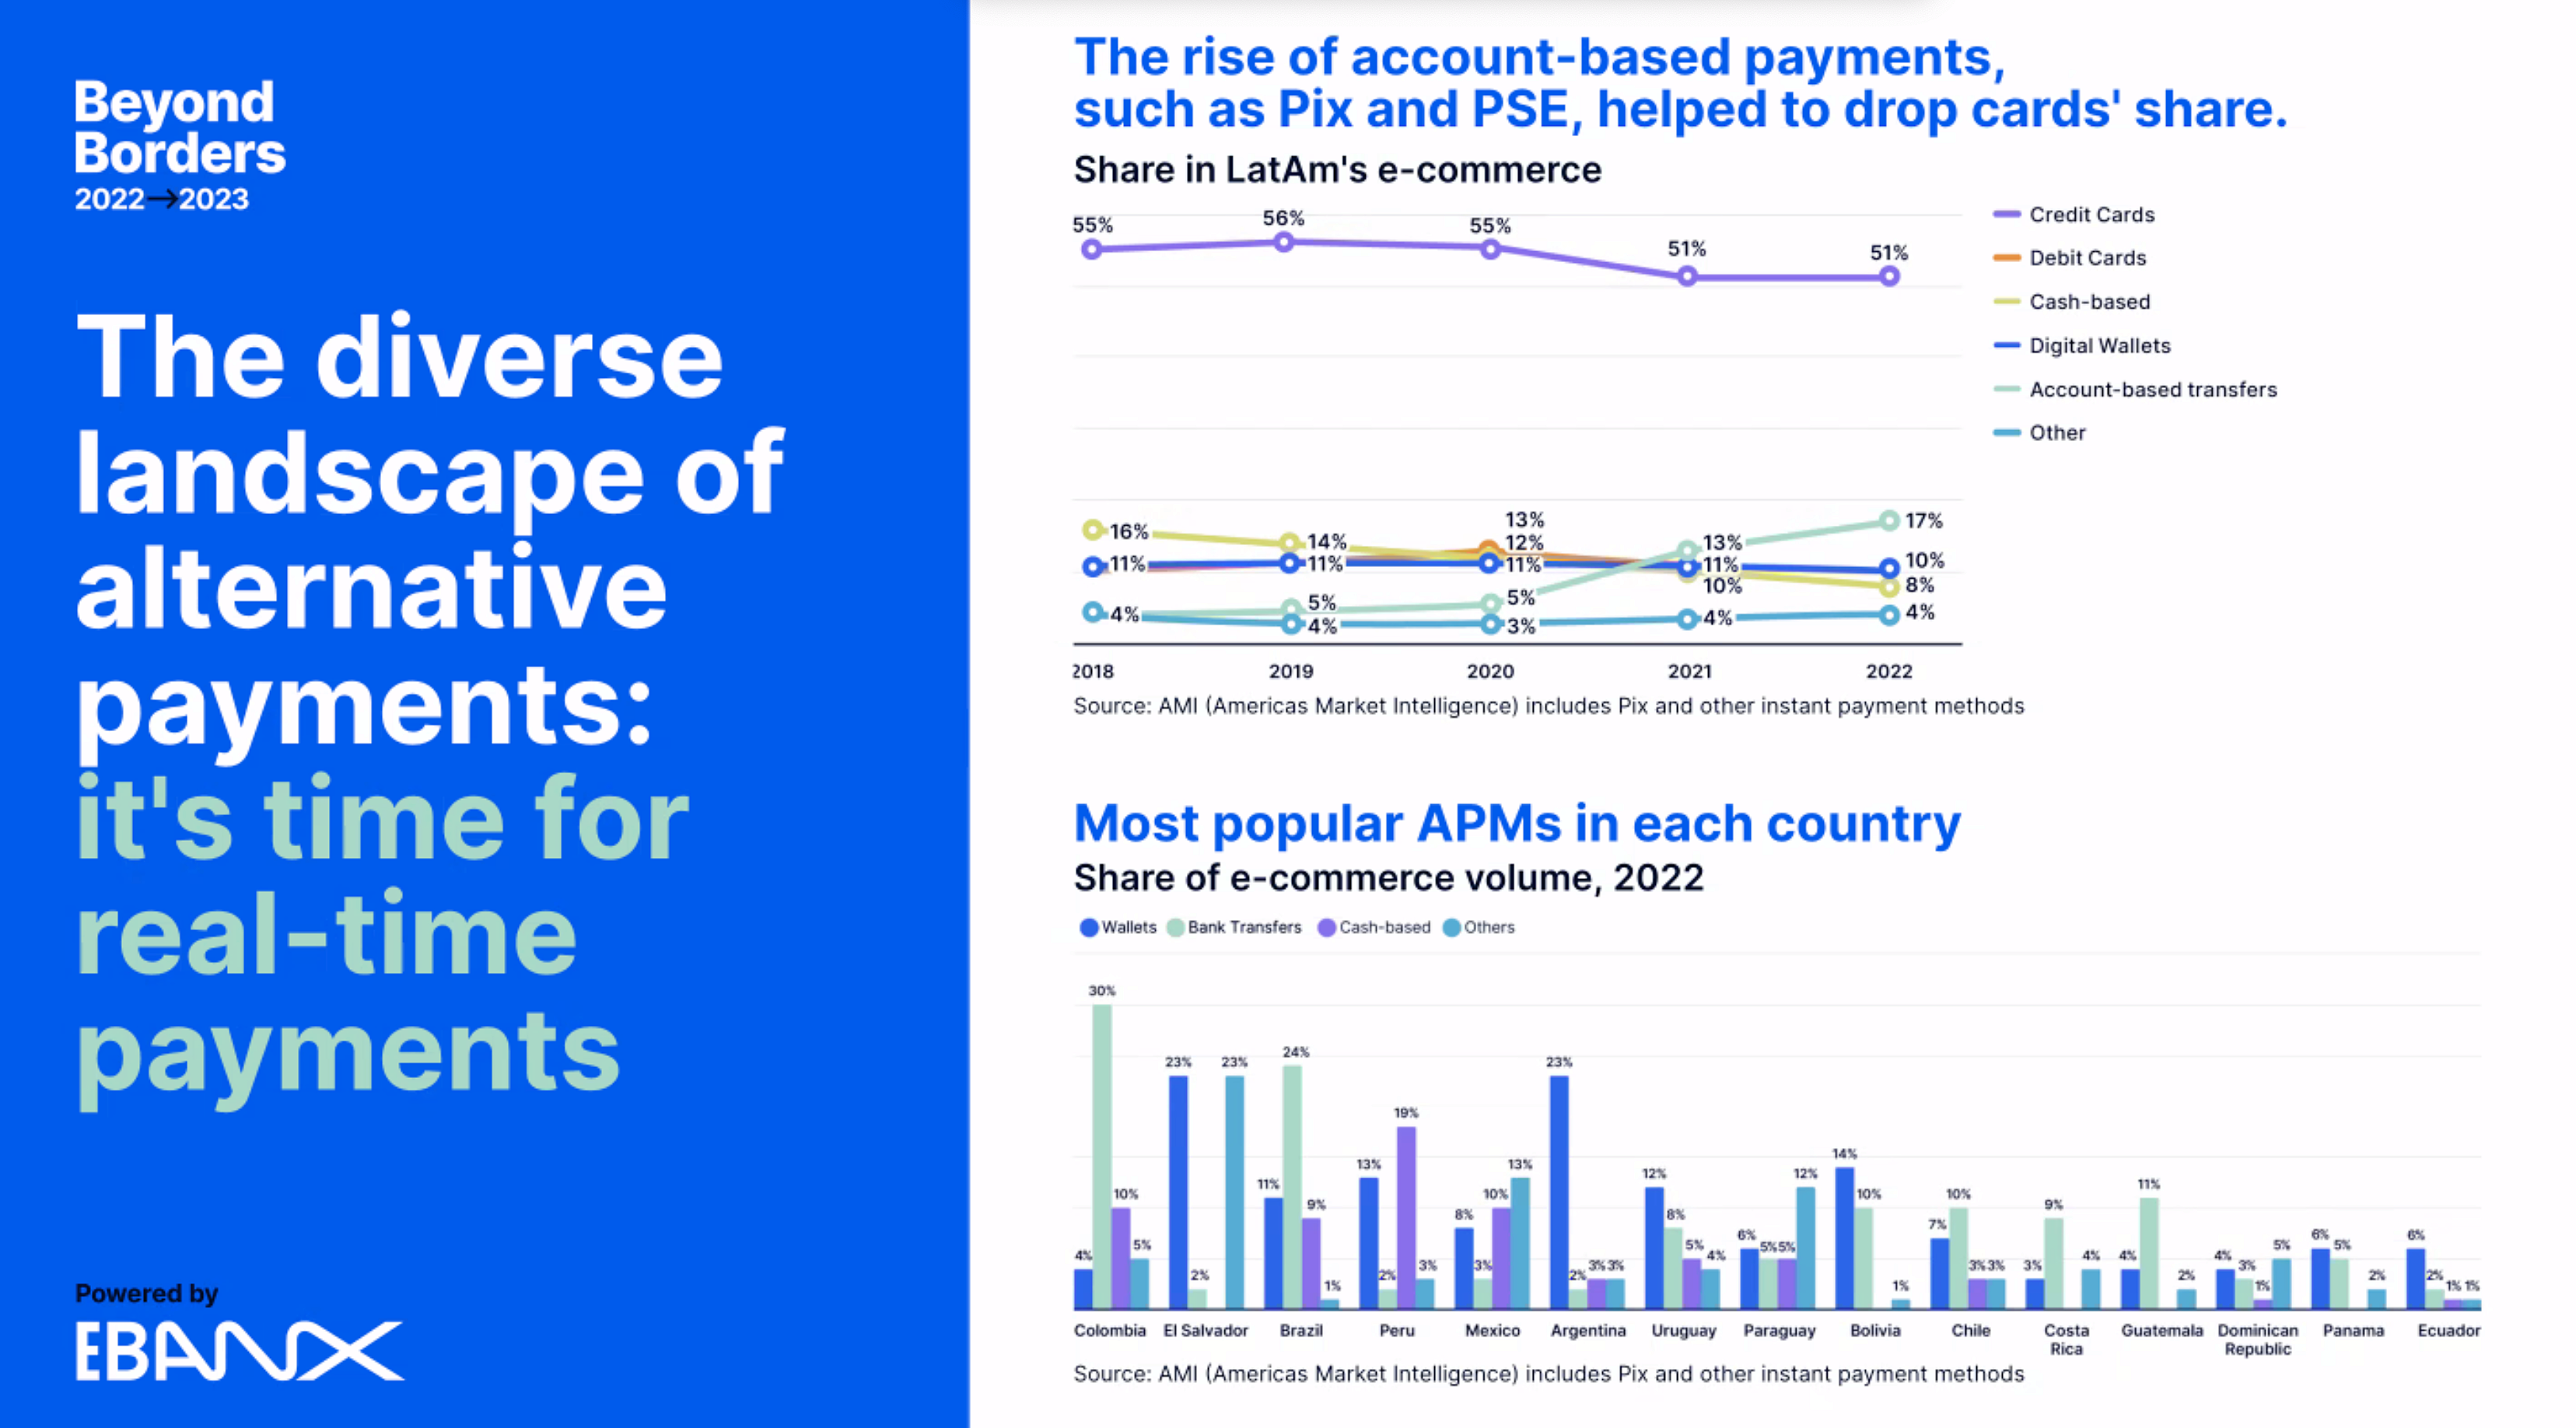 The diverse landscape of alternative payments: it's time for real-time payments